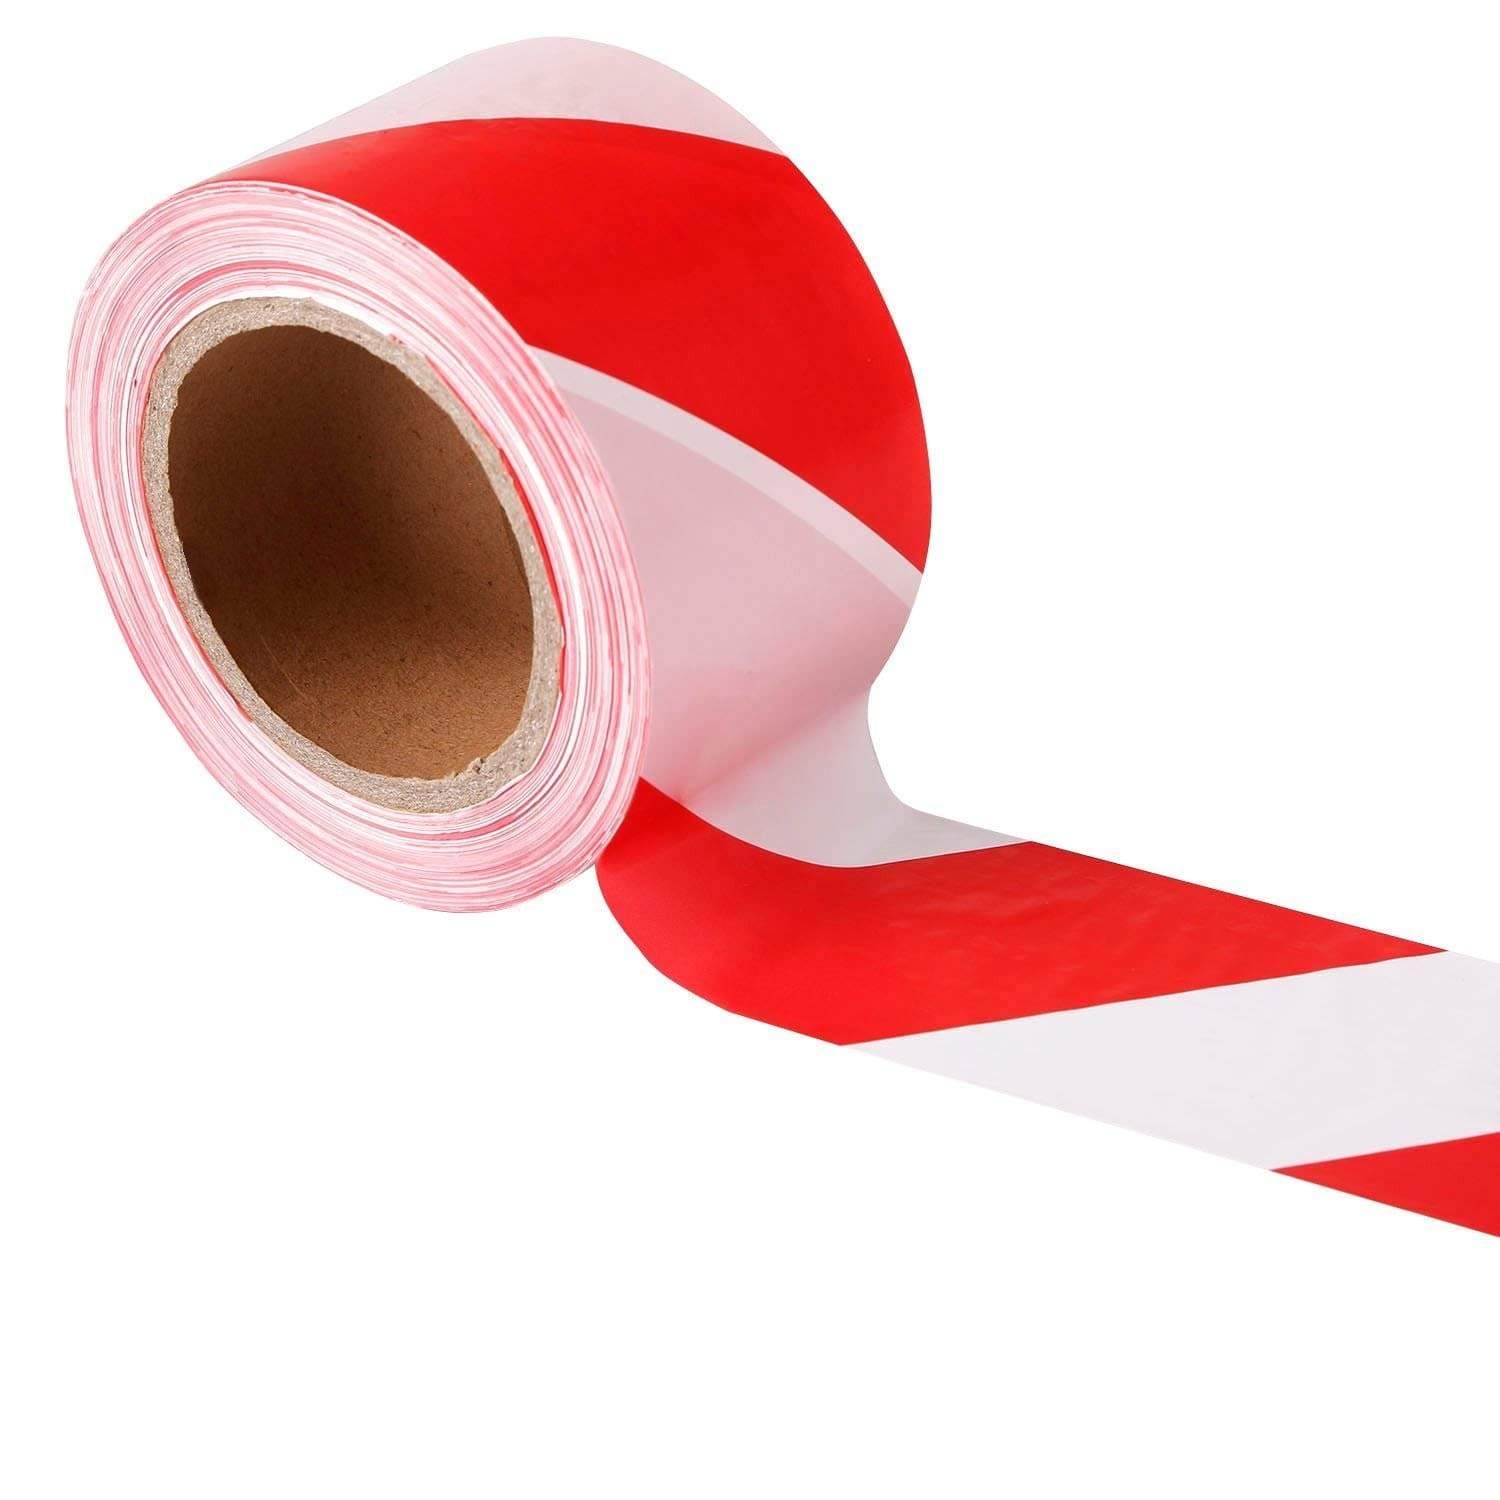 Red & White Warning Safety Tape | Supply Master | Accra, Ghana Tools Building Steel Engineering Hardware tool